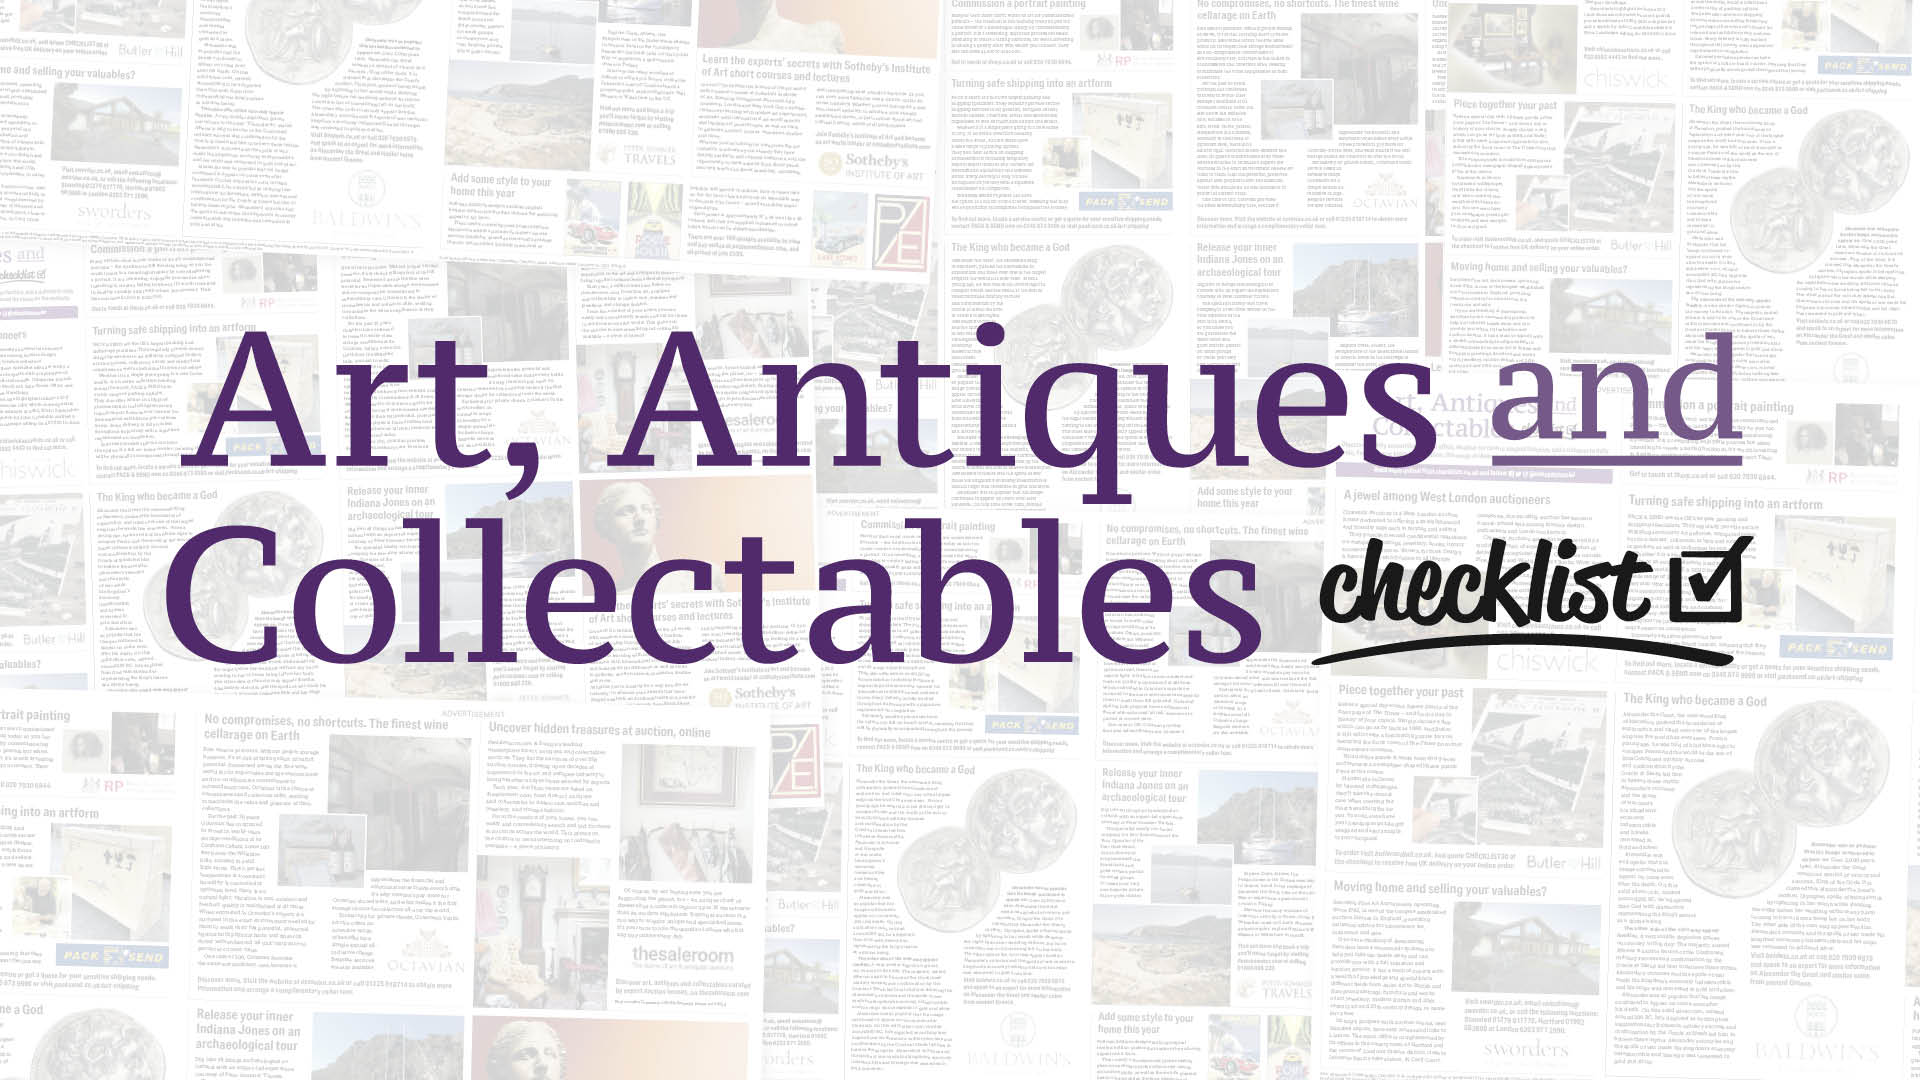 Arts, Antiques & Collectables